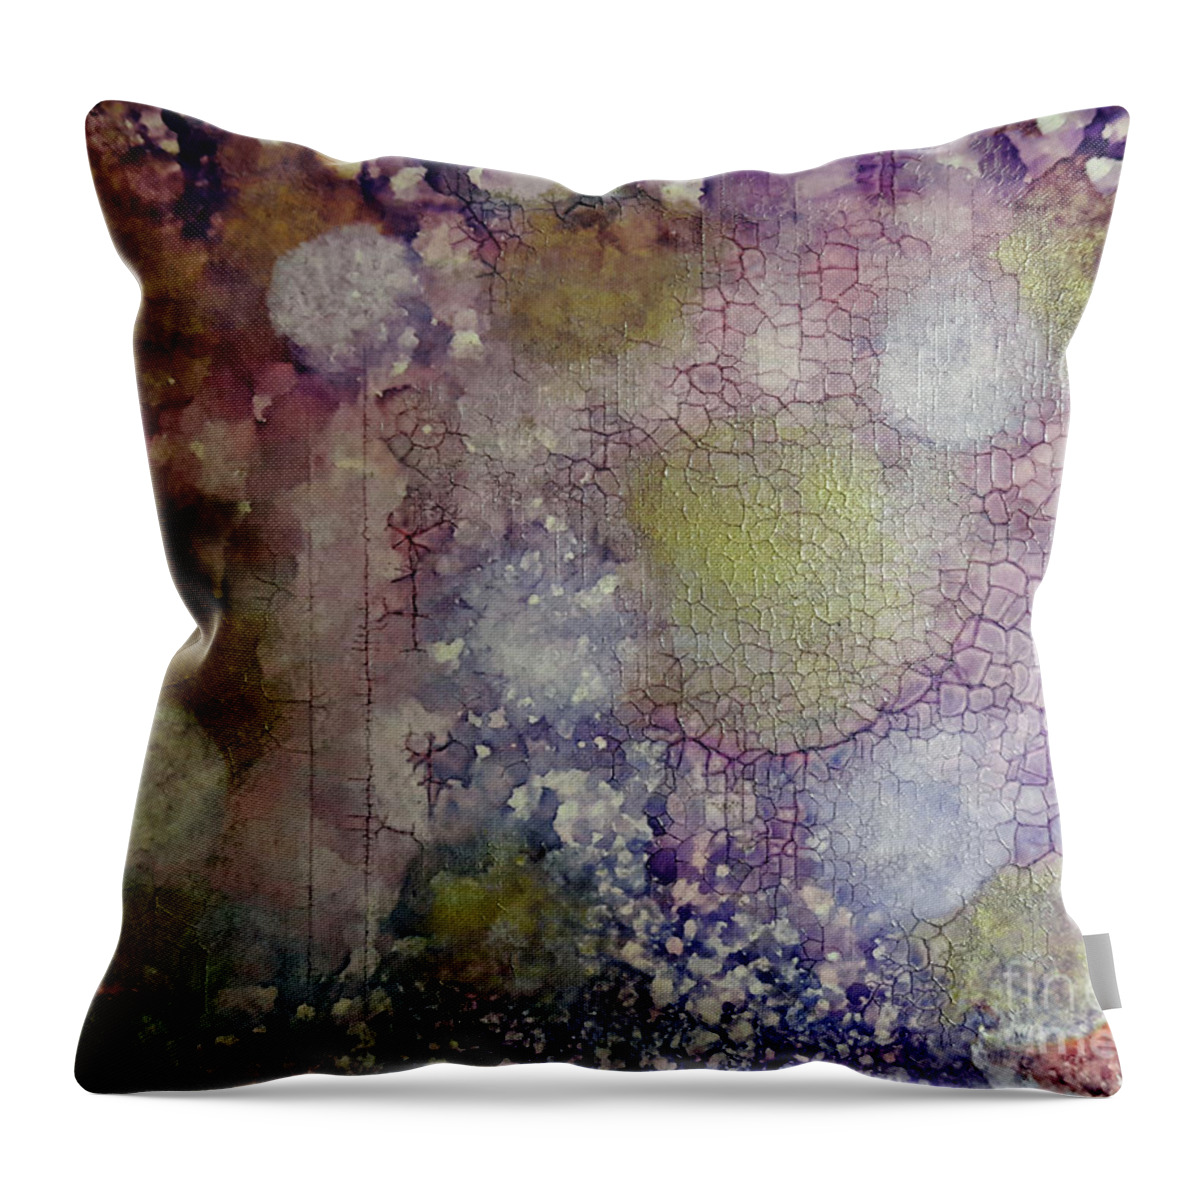 Alcohol Throw Pillow featuring the painting Cracked Lights by Terri Mills